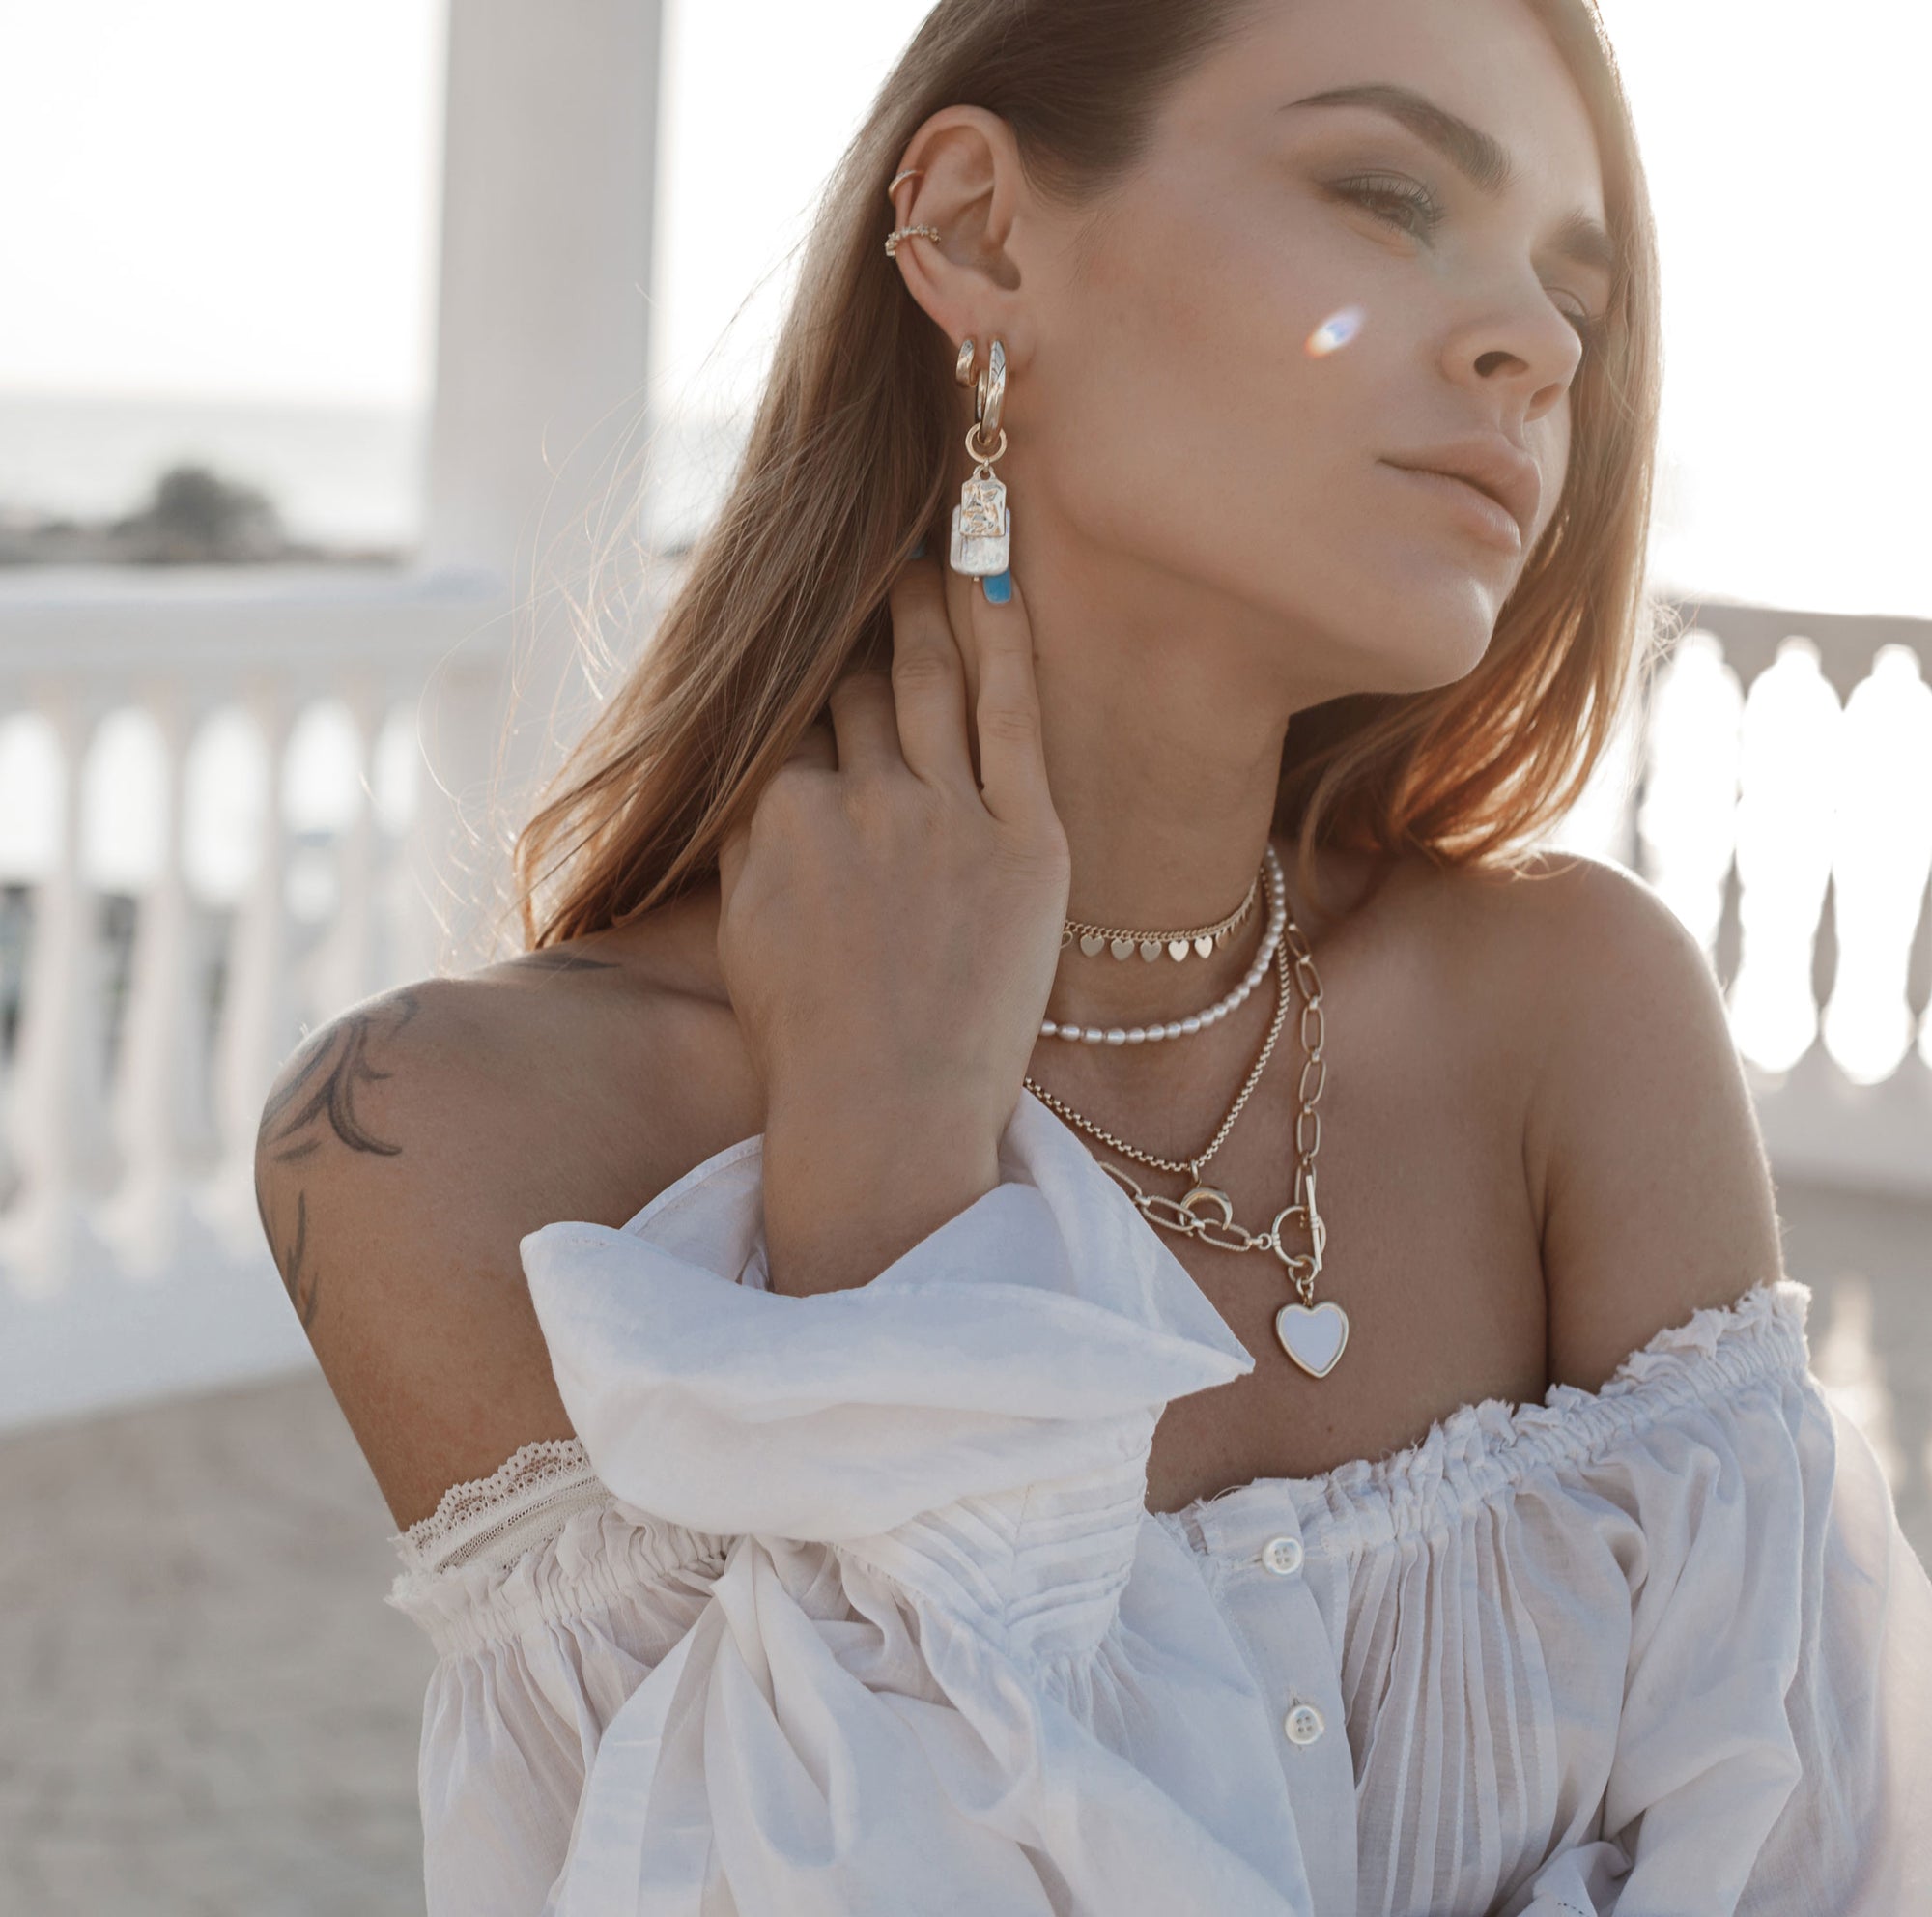 8 Tips on How to Style Jewelry for Any Occasion